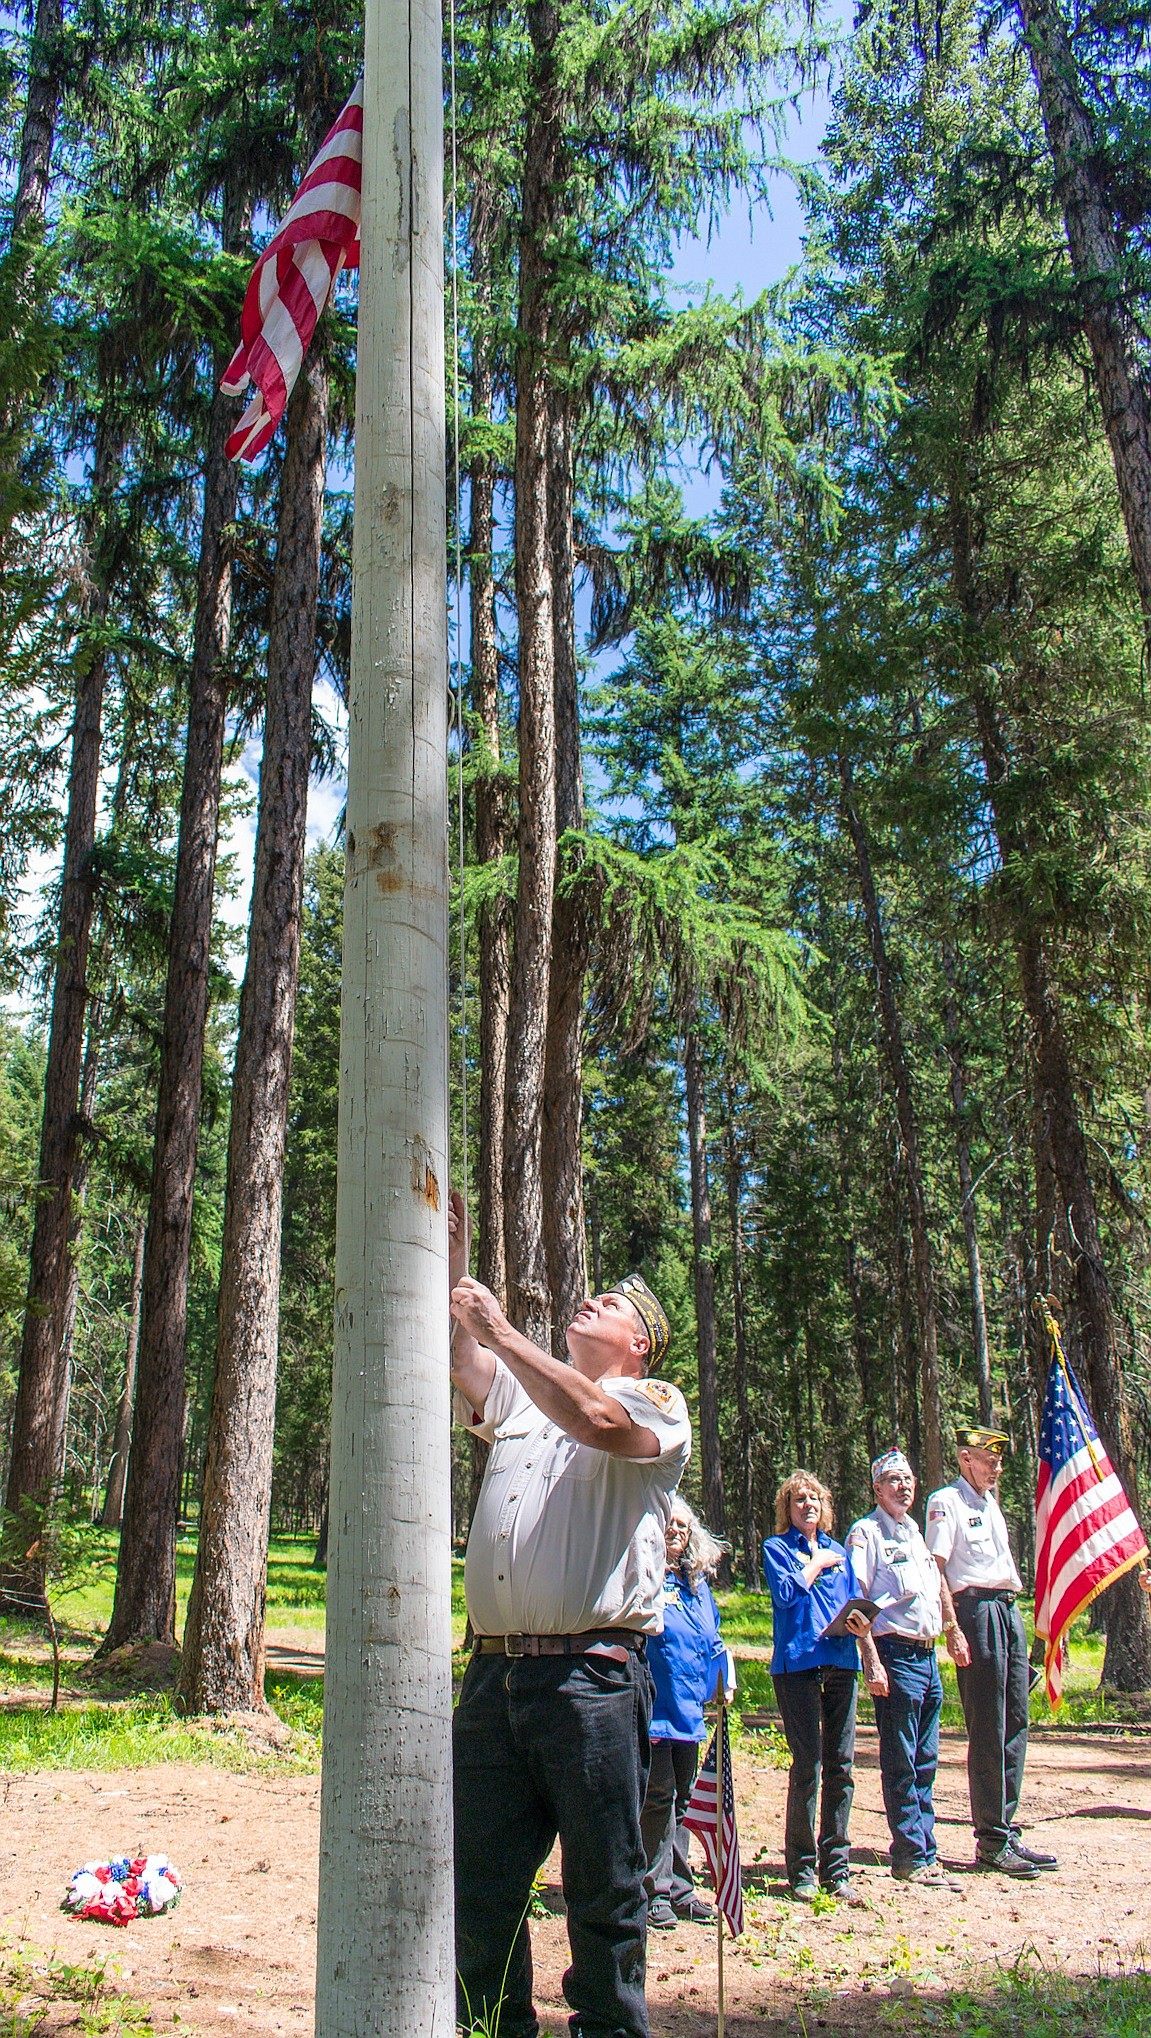 In a Memorial Day ceremony that predates the establishment of Veterans Day, VFW John E. Freeman Post 5514 member Wade Kidder lowers and raises the flag at Boyd Cemetery in the Yaak to honor both deceased and living veterans. (Ben Kibbey/The Western News)